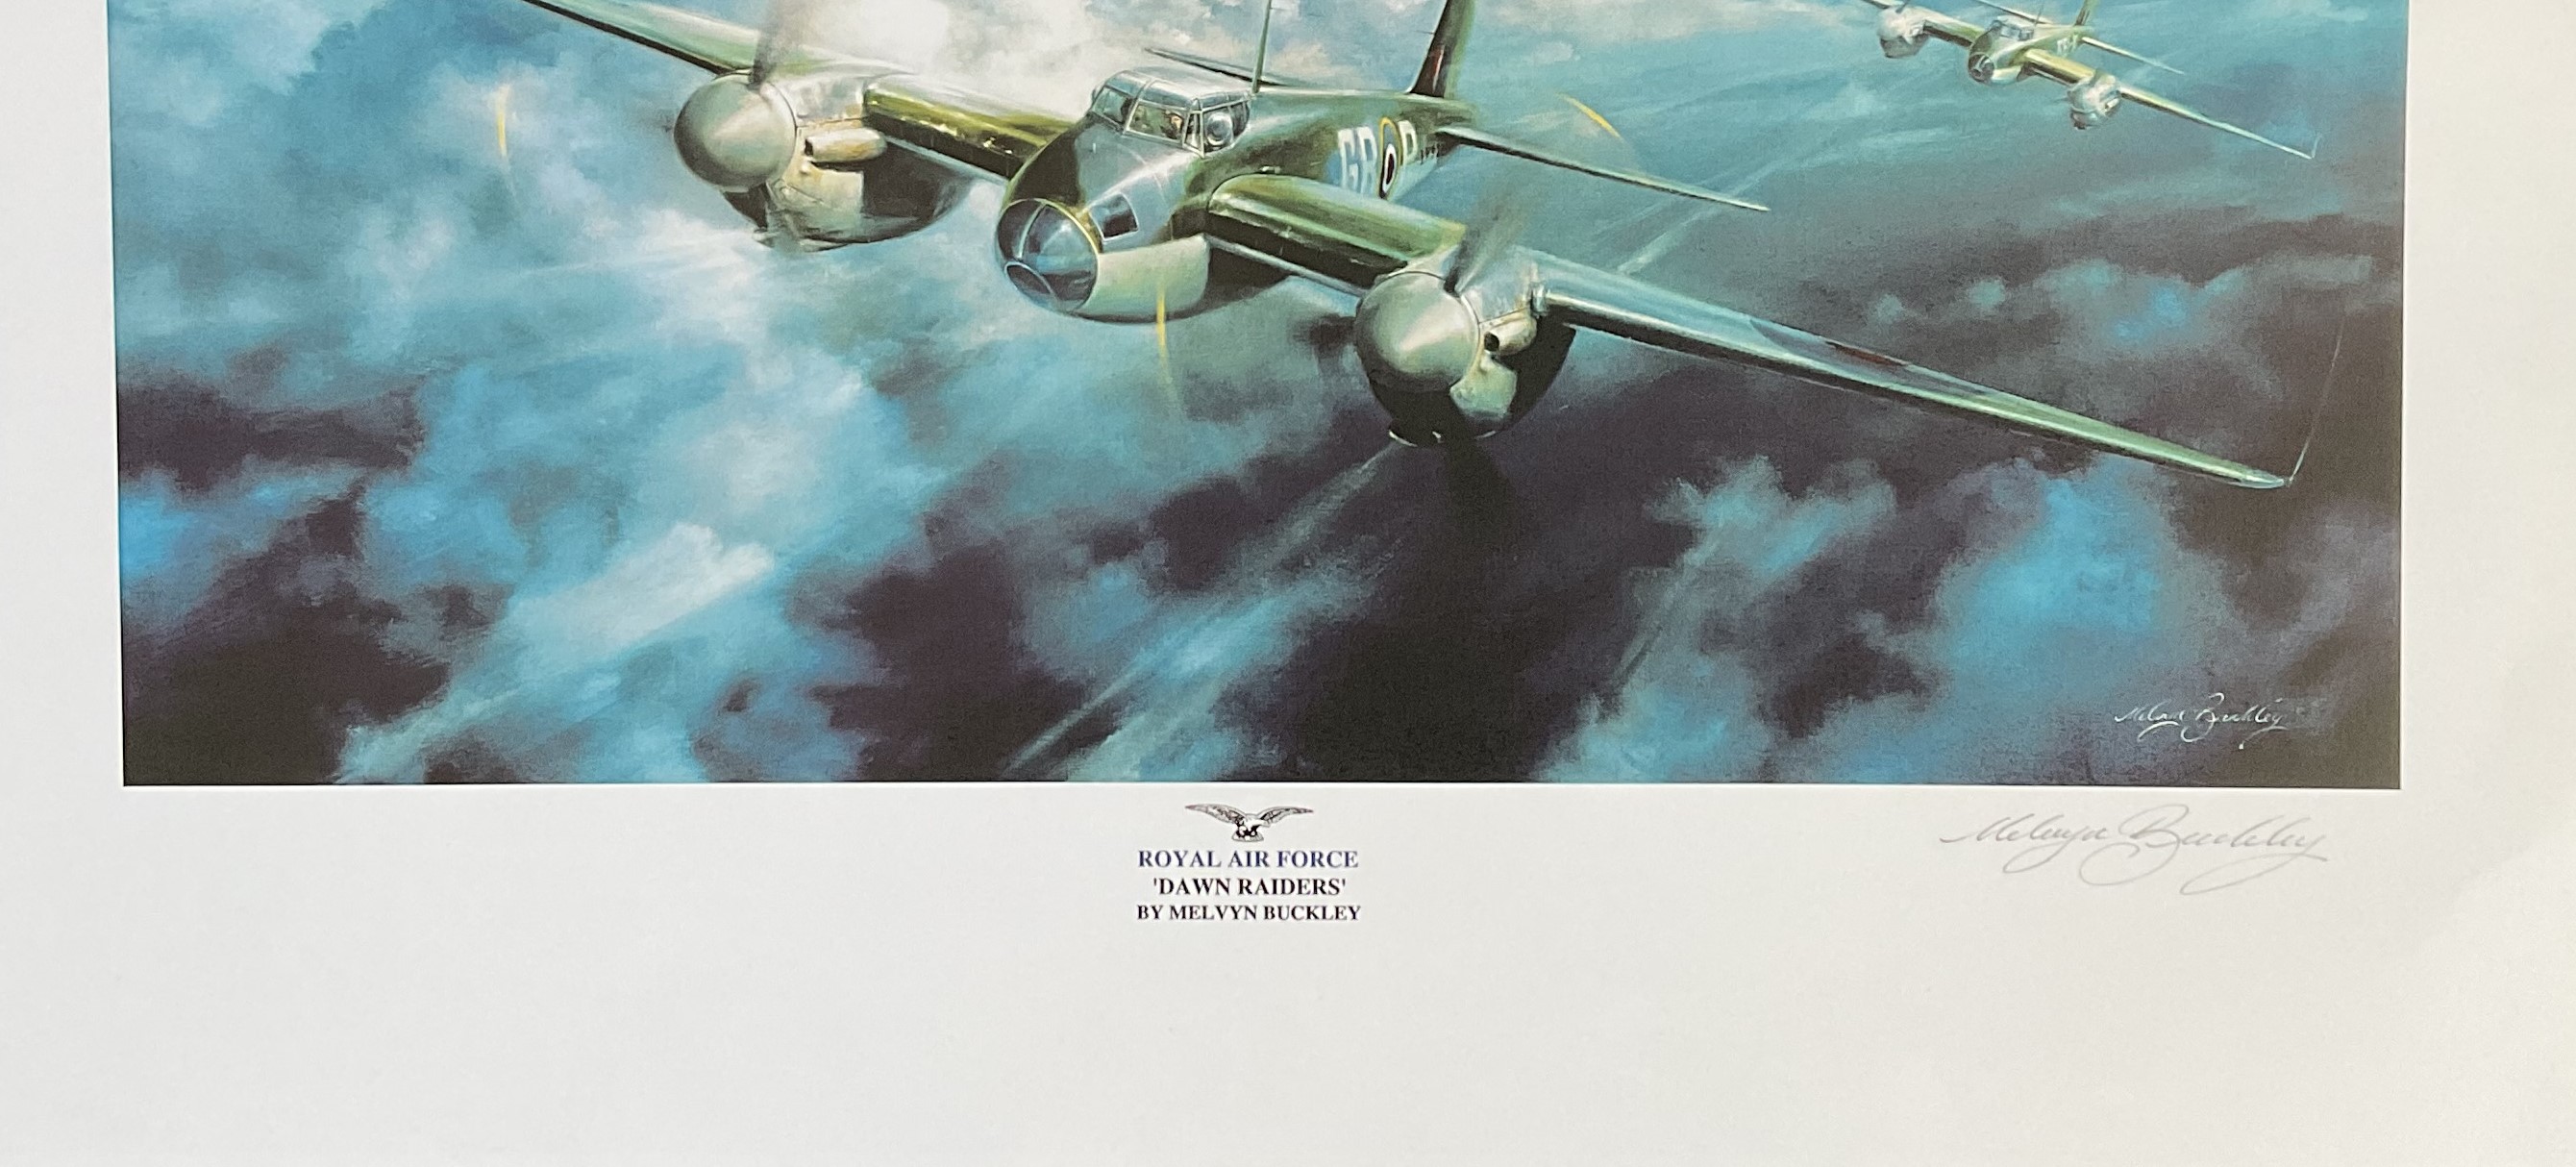 WW2 Colour Print Titled Dawn Raiders Royal Air Force. By Melvyn Buckley. Signed in Pencil by - Image 2 of 2